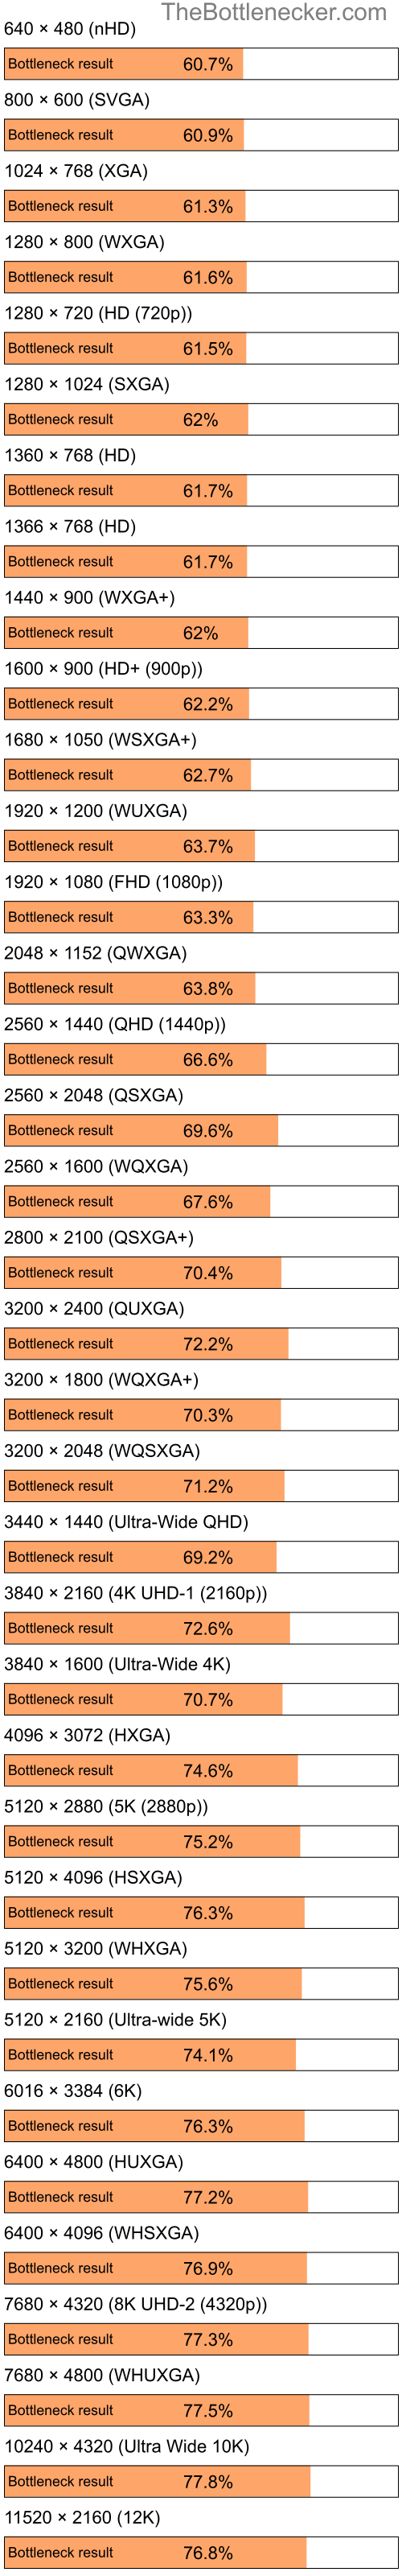 Bottleneck results by resolution for Intel Pentium 4 and NVIDIA Quadro FX 360M in General Tasks